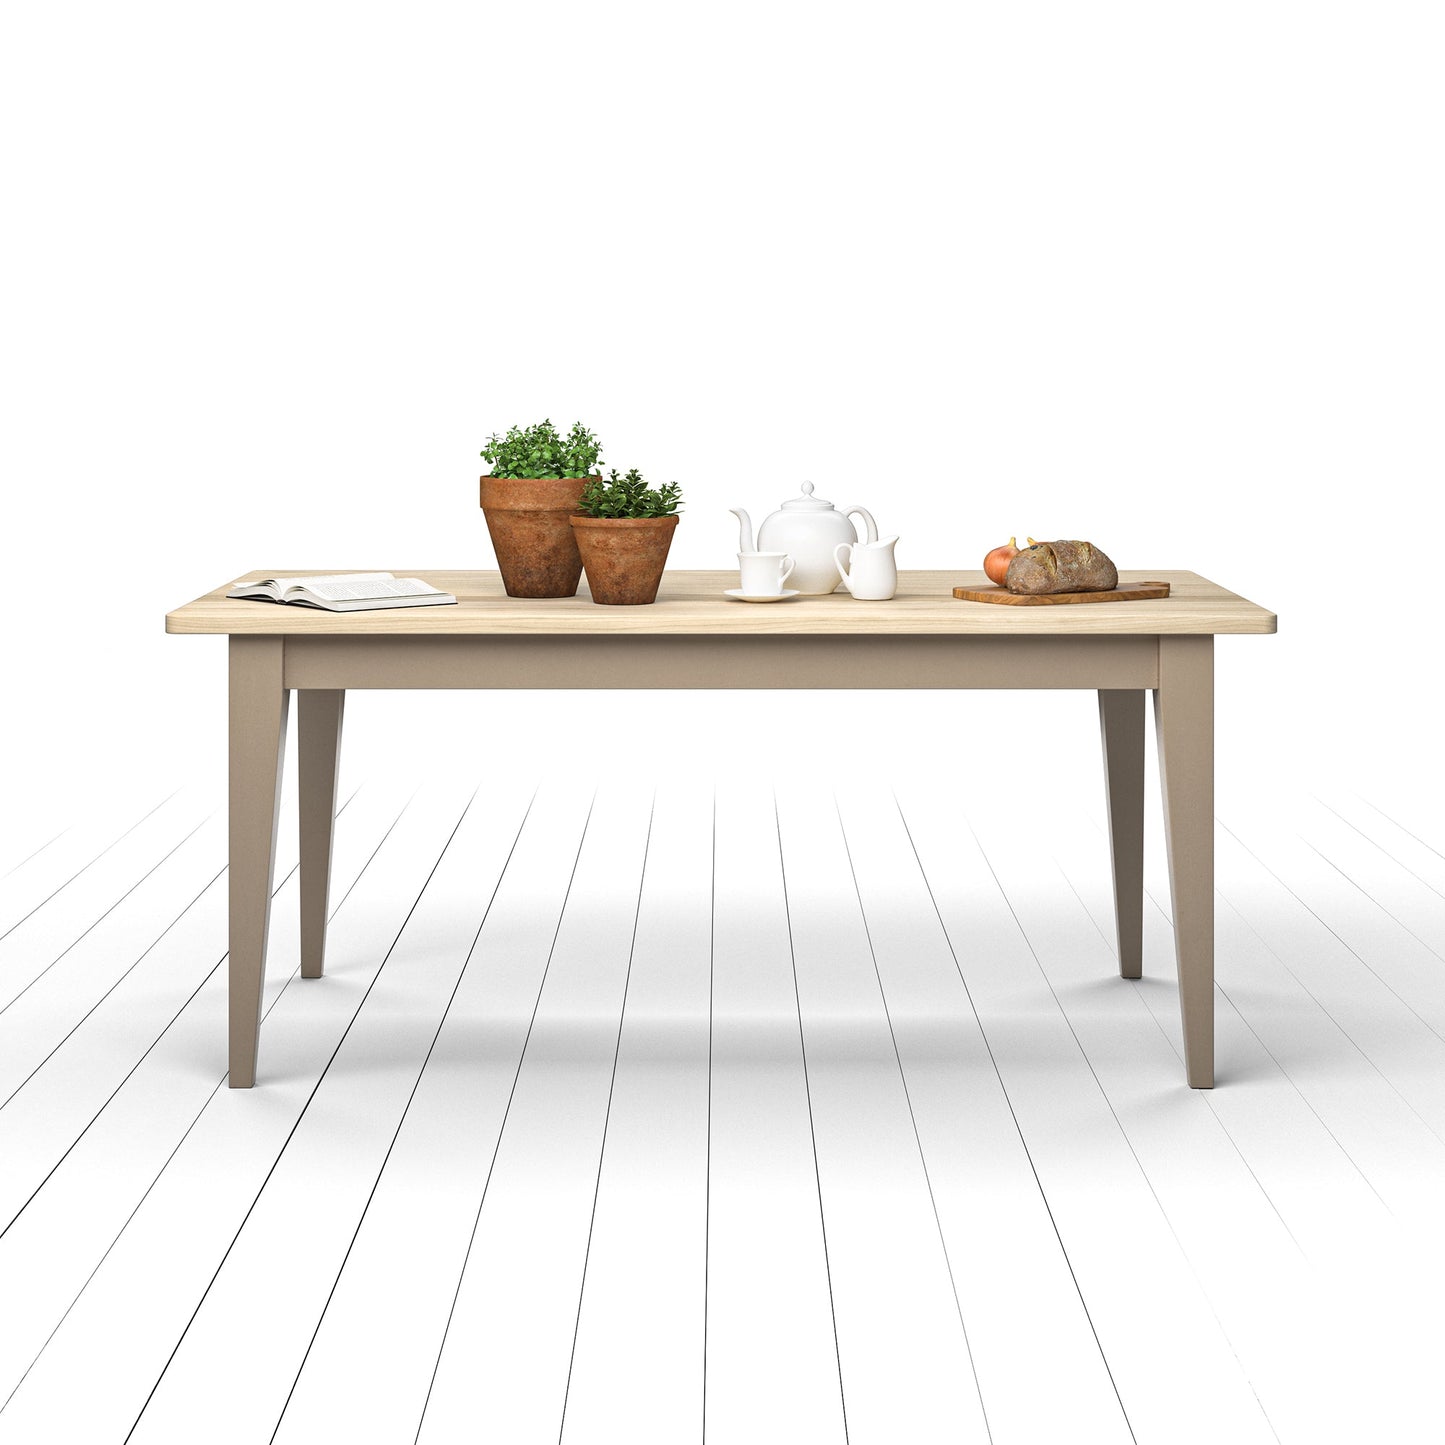 A Kiki Ash Farmhouse Table with a potted plant for interior decor.